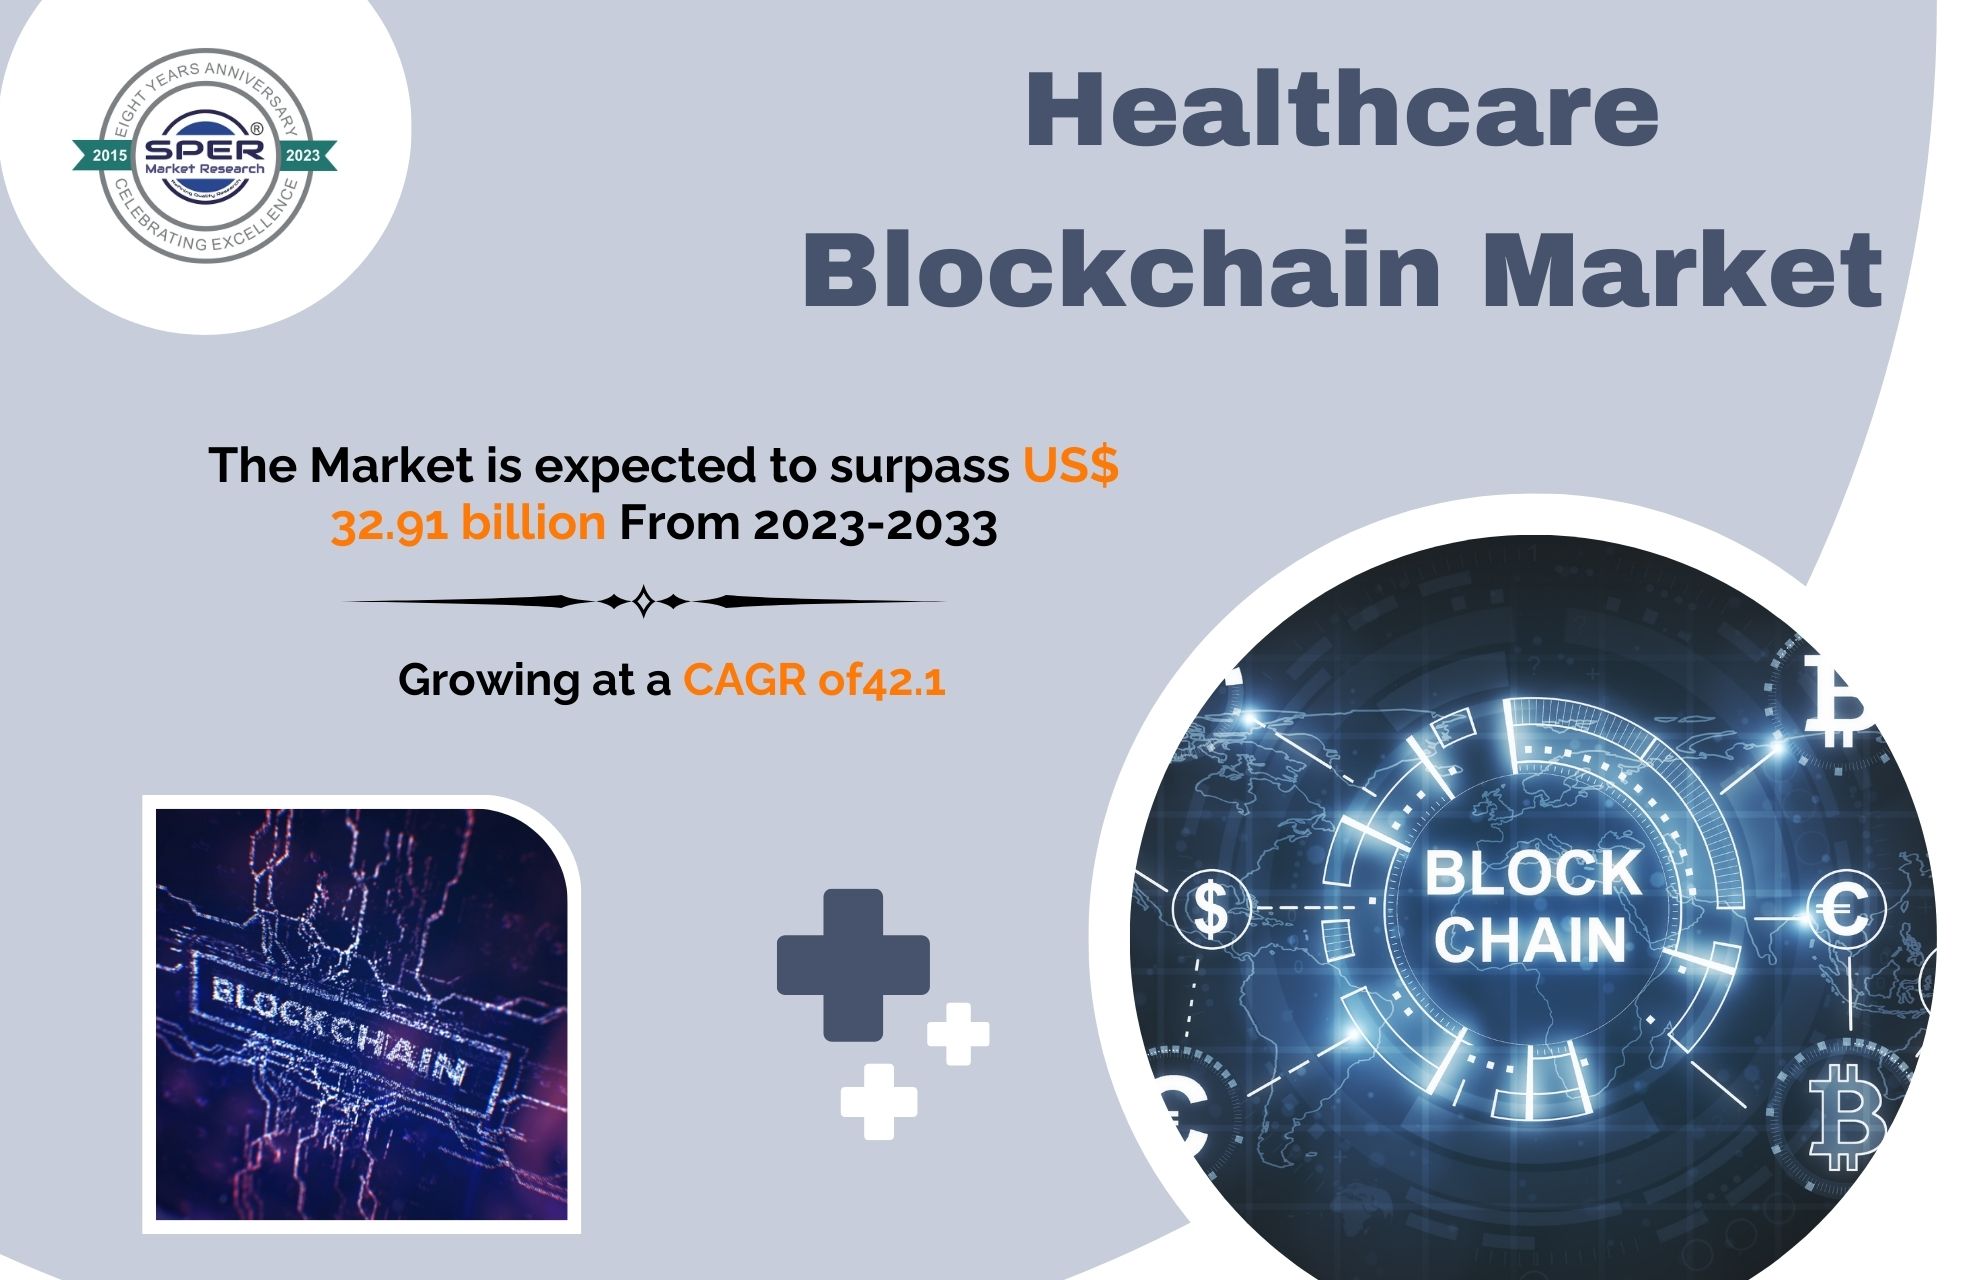 Healthcare Blockchain Market Share 2023- Global Industry Trends, Revenue, Growth Drivers, Latest Technologies, Business Opportunities and Future Investment till 2033: SPER Market Research